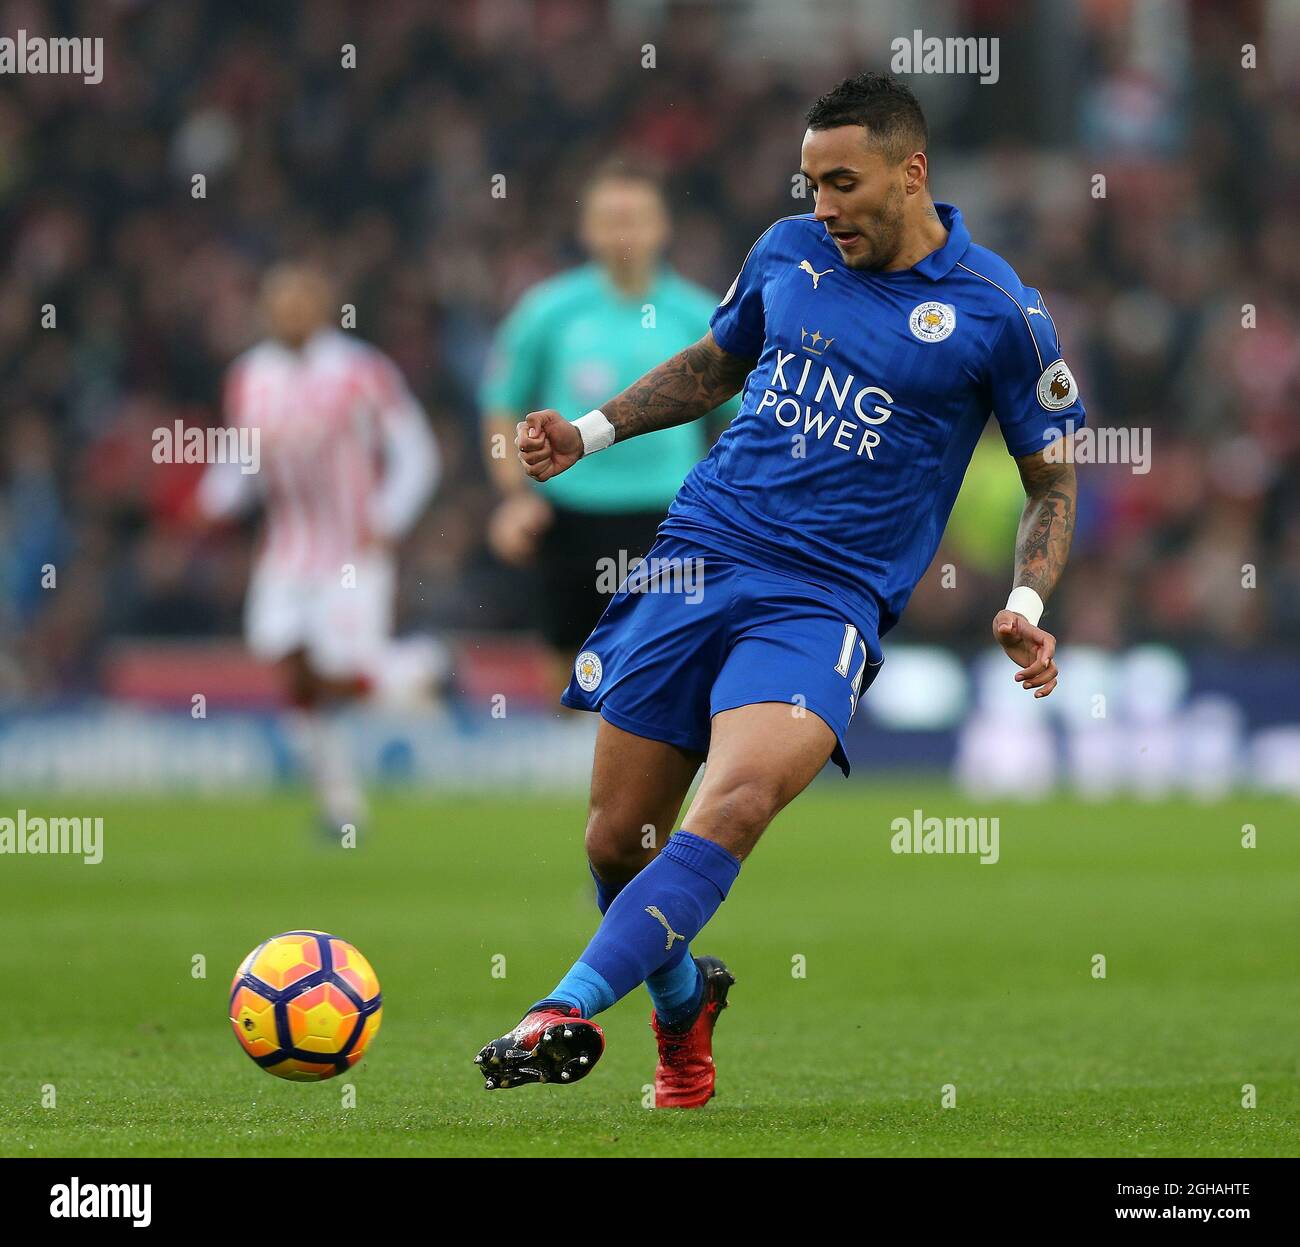 Danny Simpson of Leicester City during the English Premier League match at the Bet 365 Stadium, Stoke on Trent. Picture date: December 17th, 2016. Pic Simon Bellis/Sportimage via PA Images Stock Photo